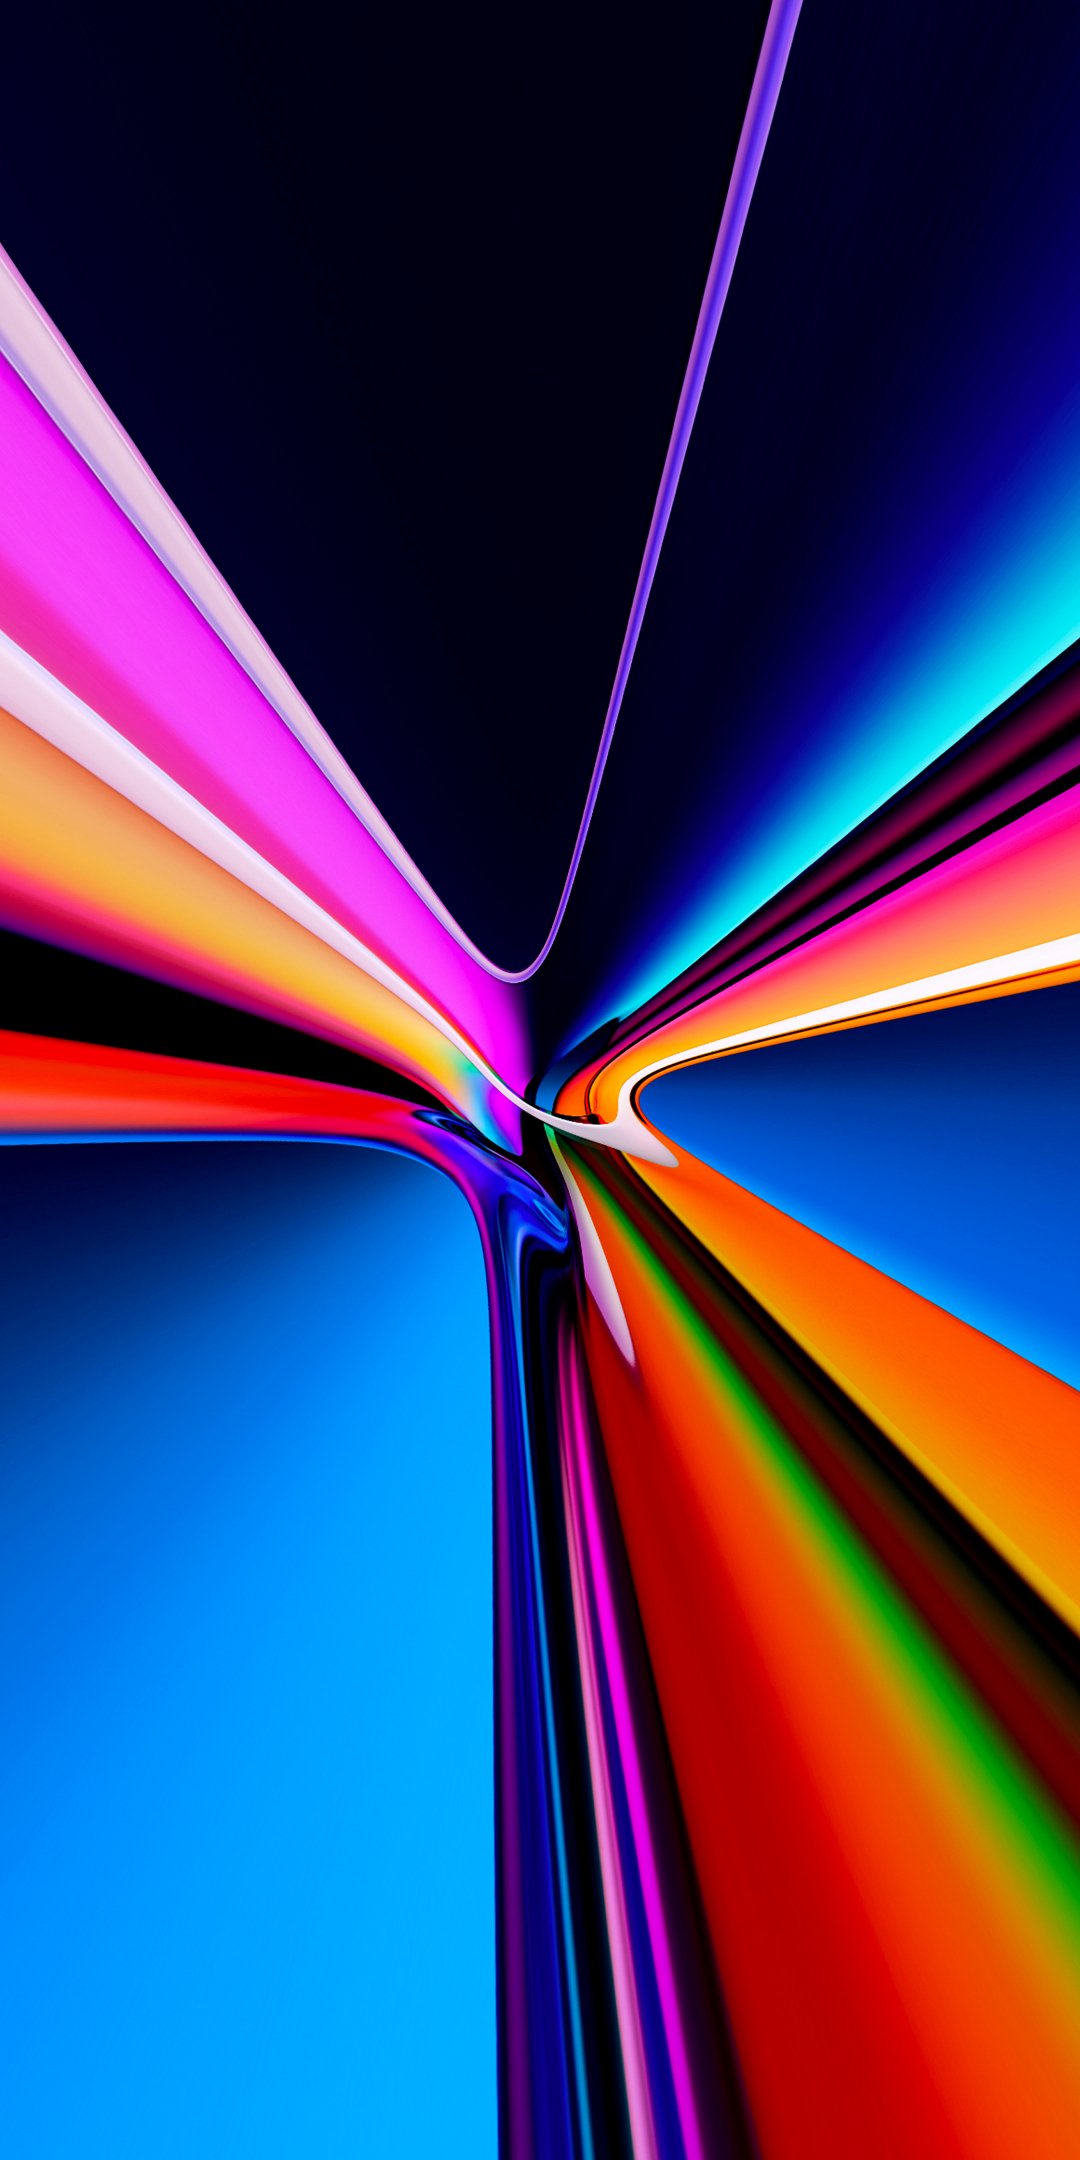 Stripes, colorful, abstract, 1080x2160 wallpaper